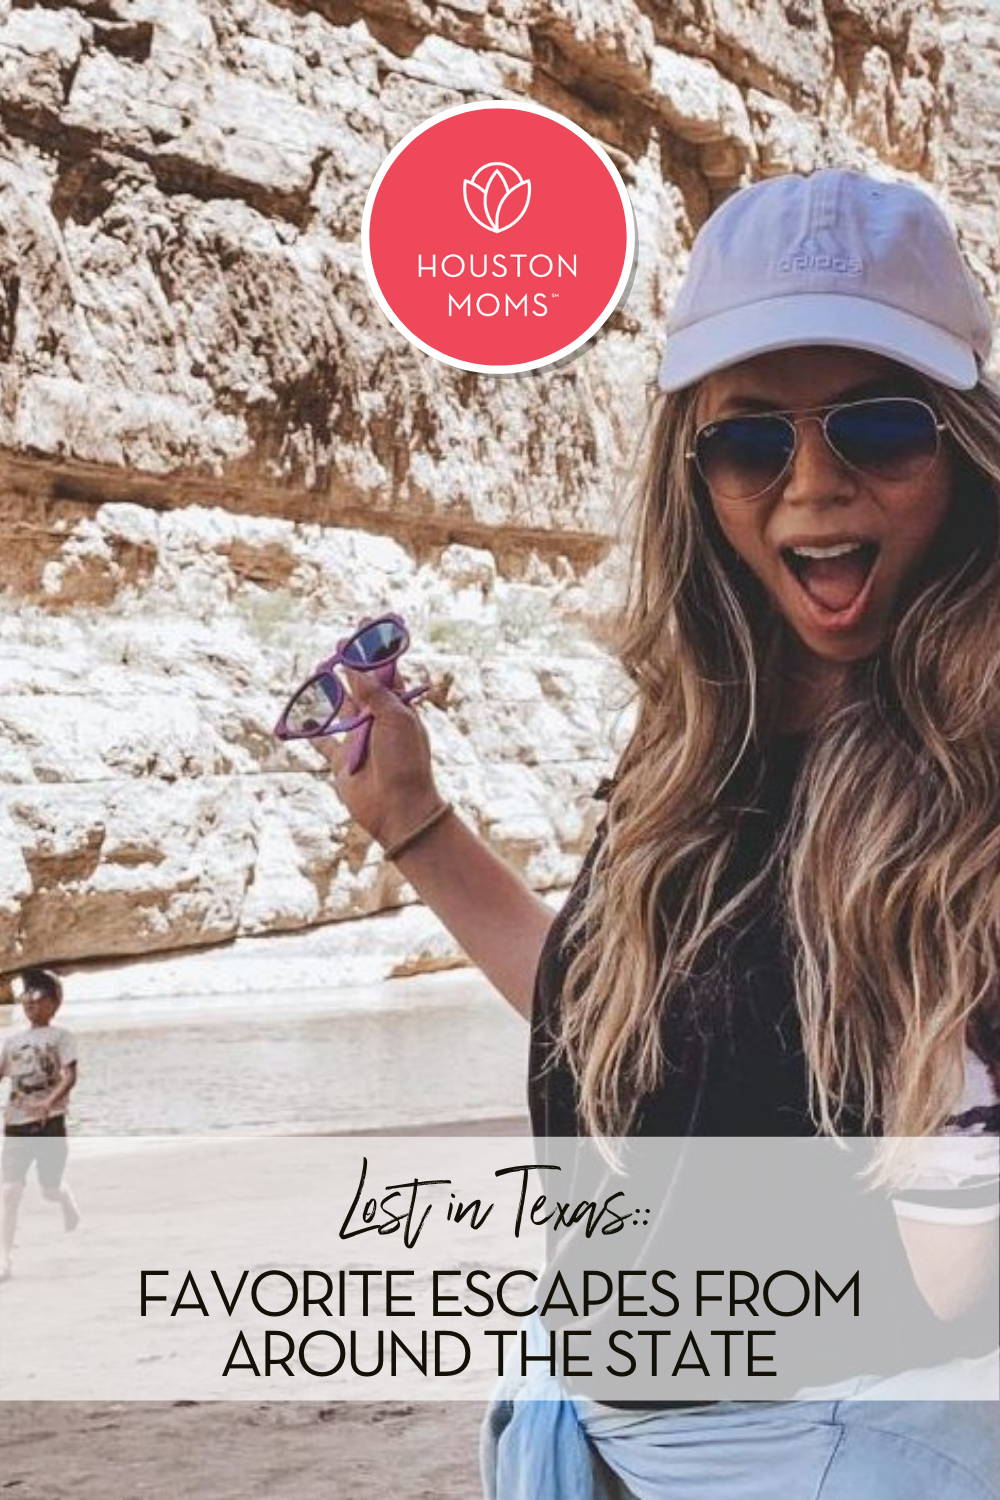 Lost in Texas: Favorite Escapes from around the State. A photograph of a woman with a cliff and river in the background. Logo: Houston moms. 